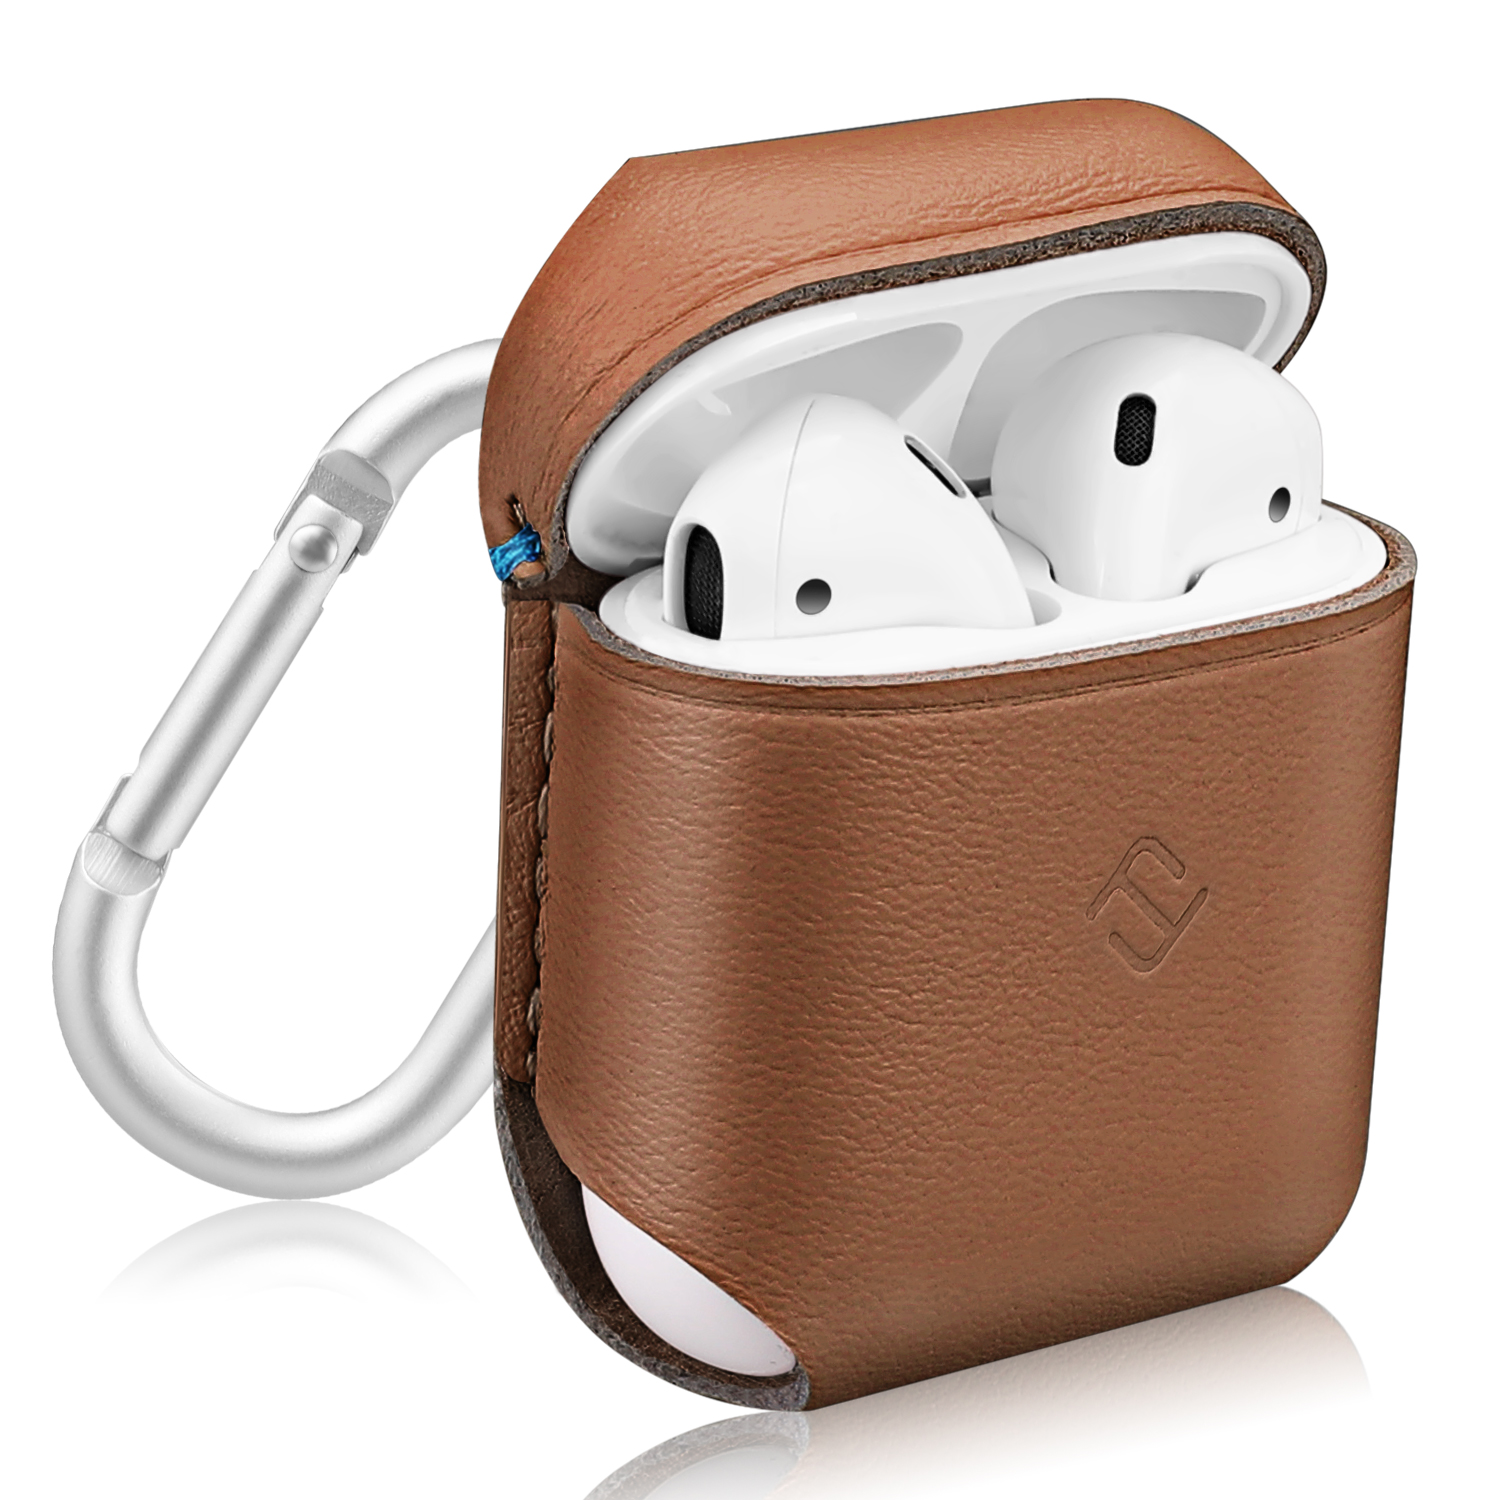 Fintie AirPods Genuine Leather Case - Protective Earbud Cover Skin with Carabiner, Brown - image 1 of 7